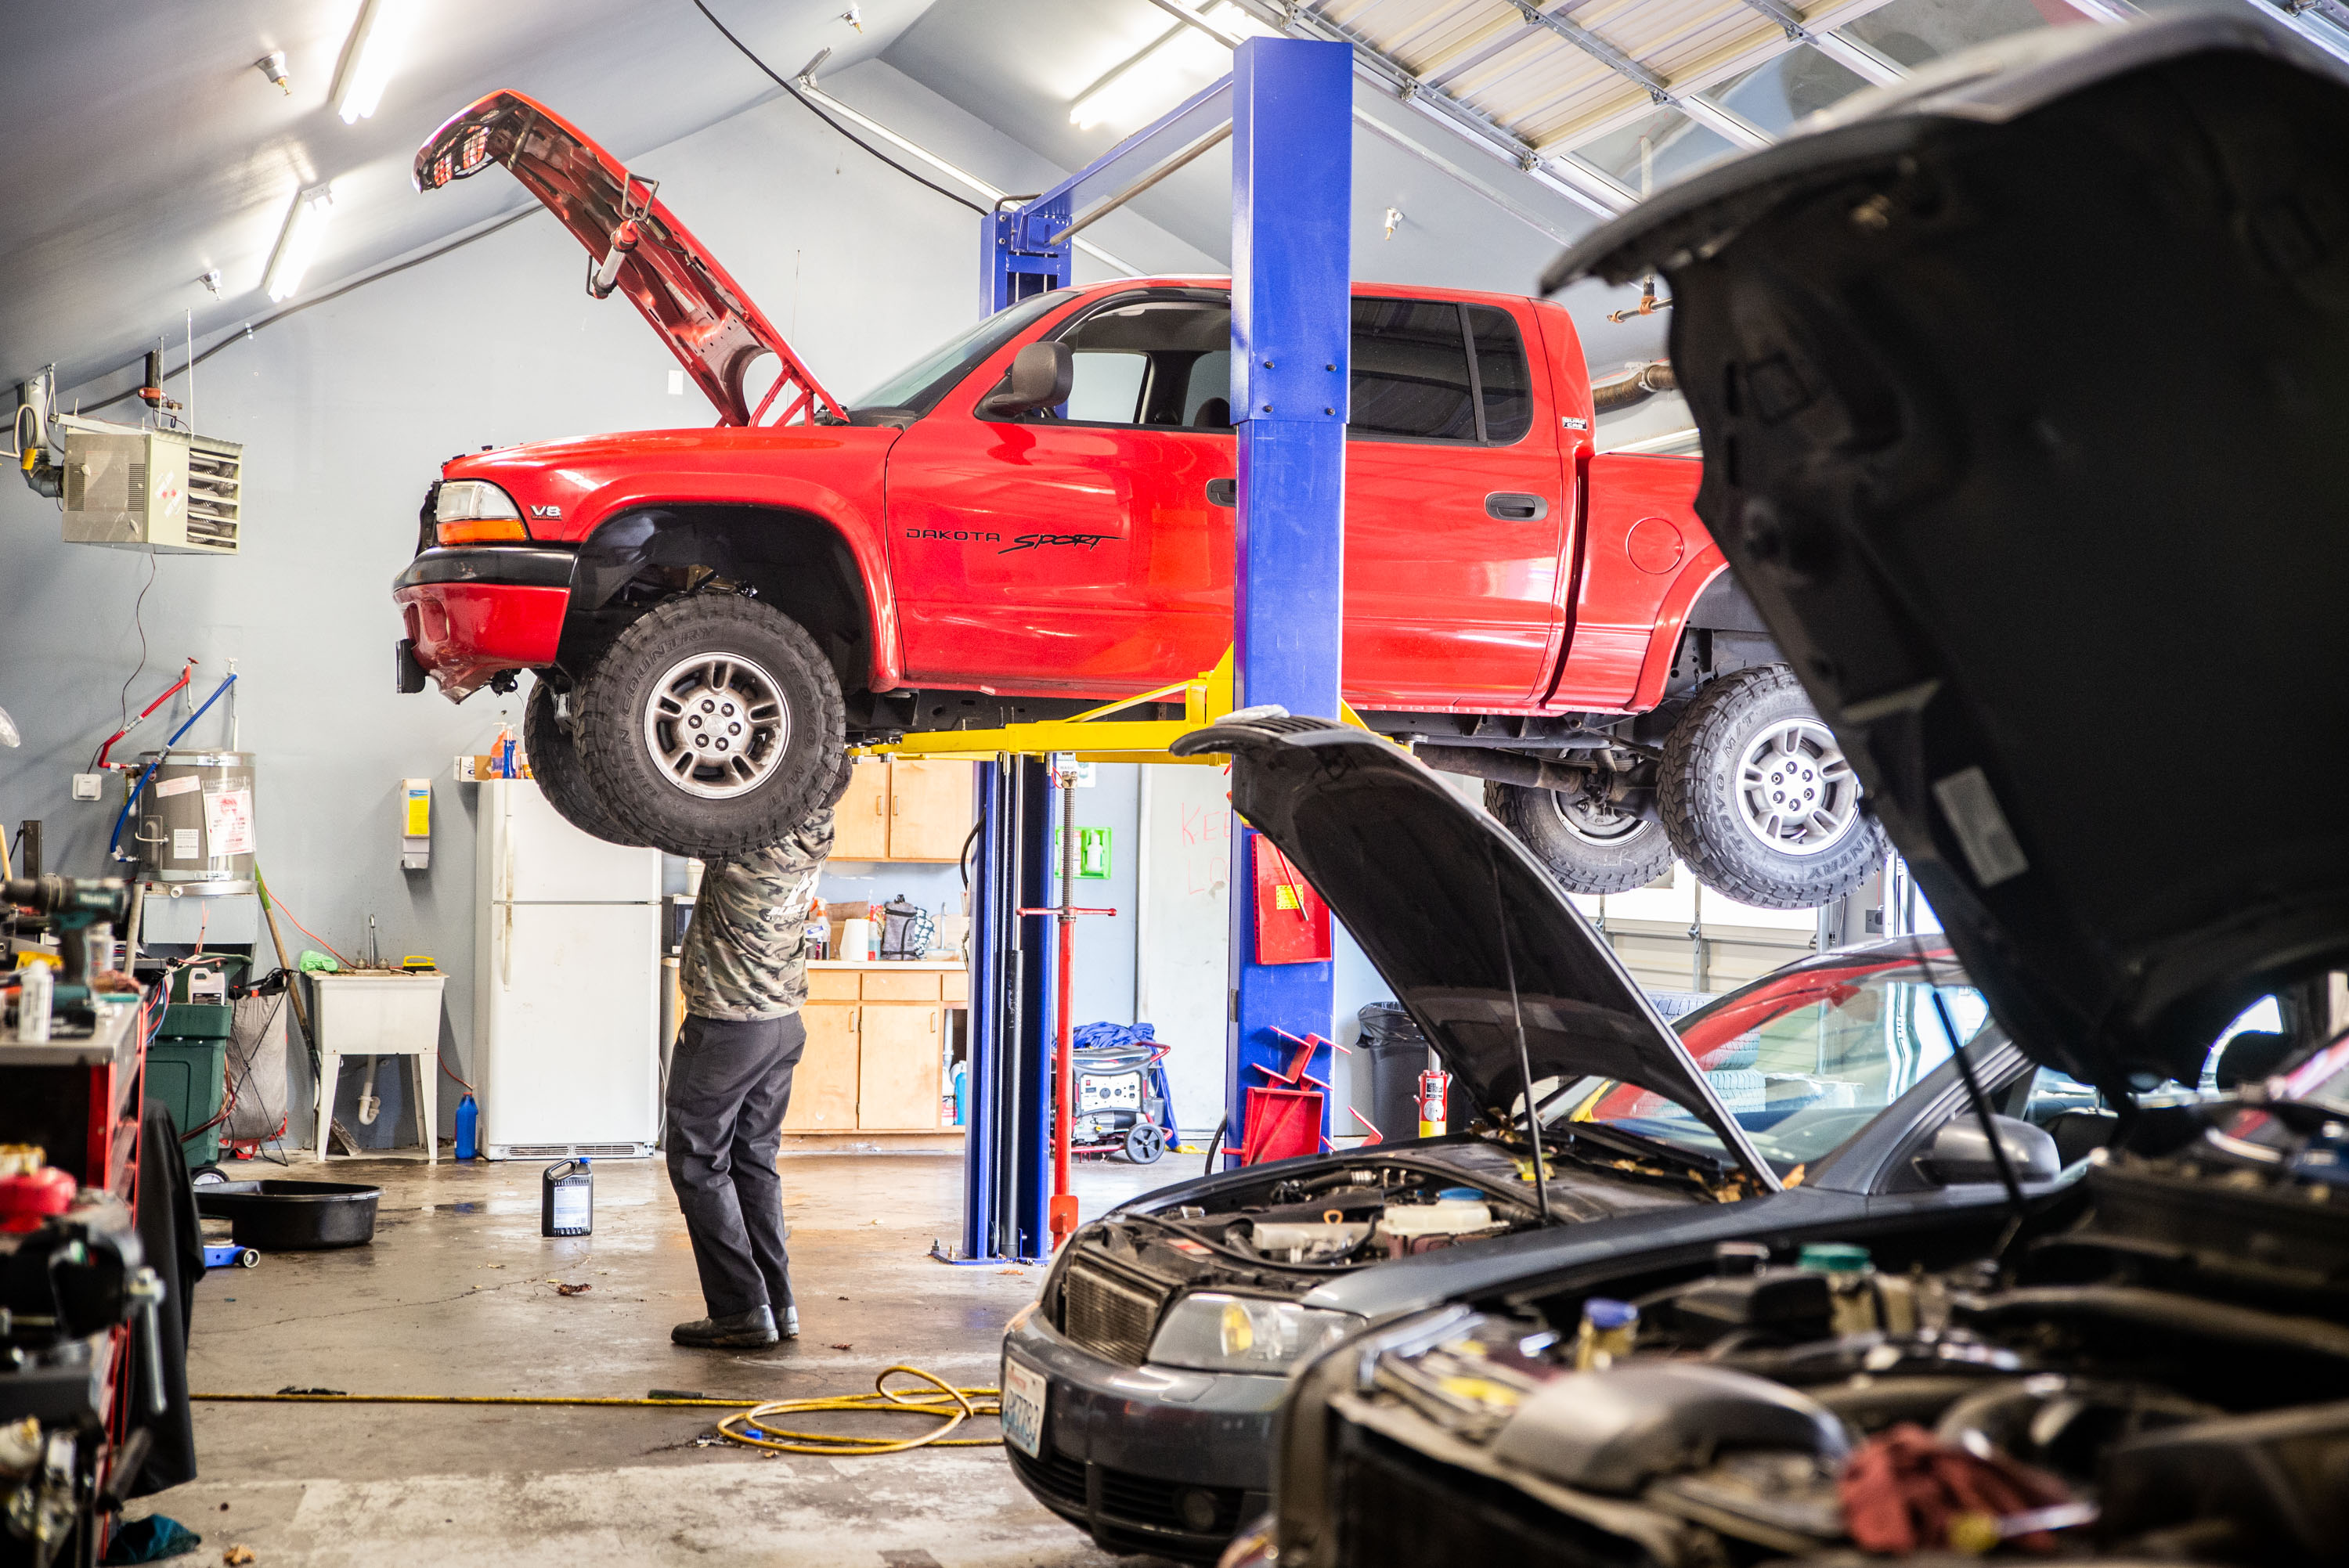 Boss Auto Repair In Olympia Is A One Stop Shop For All Car Repair And Maintenance Needs - Thurstontalk